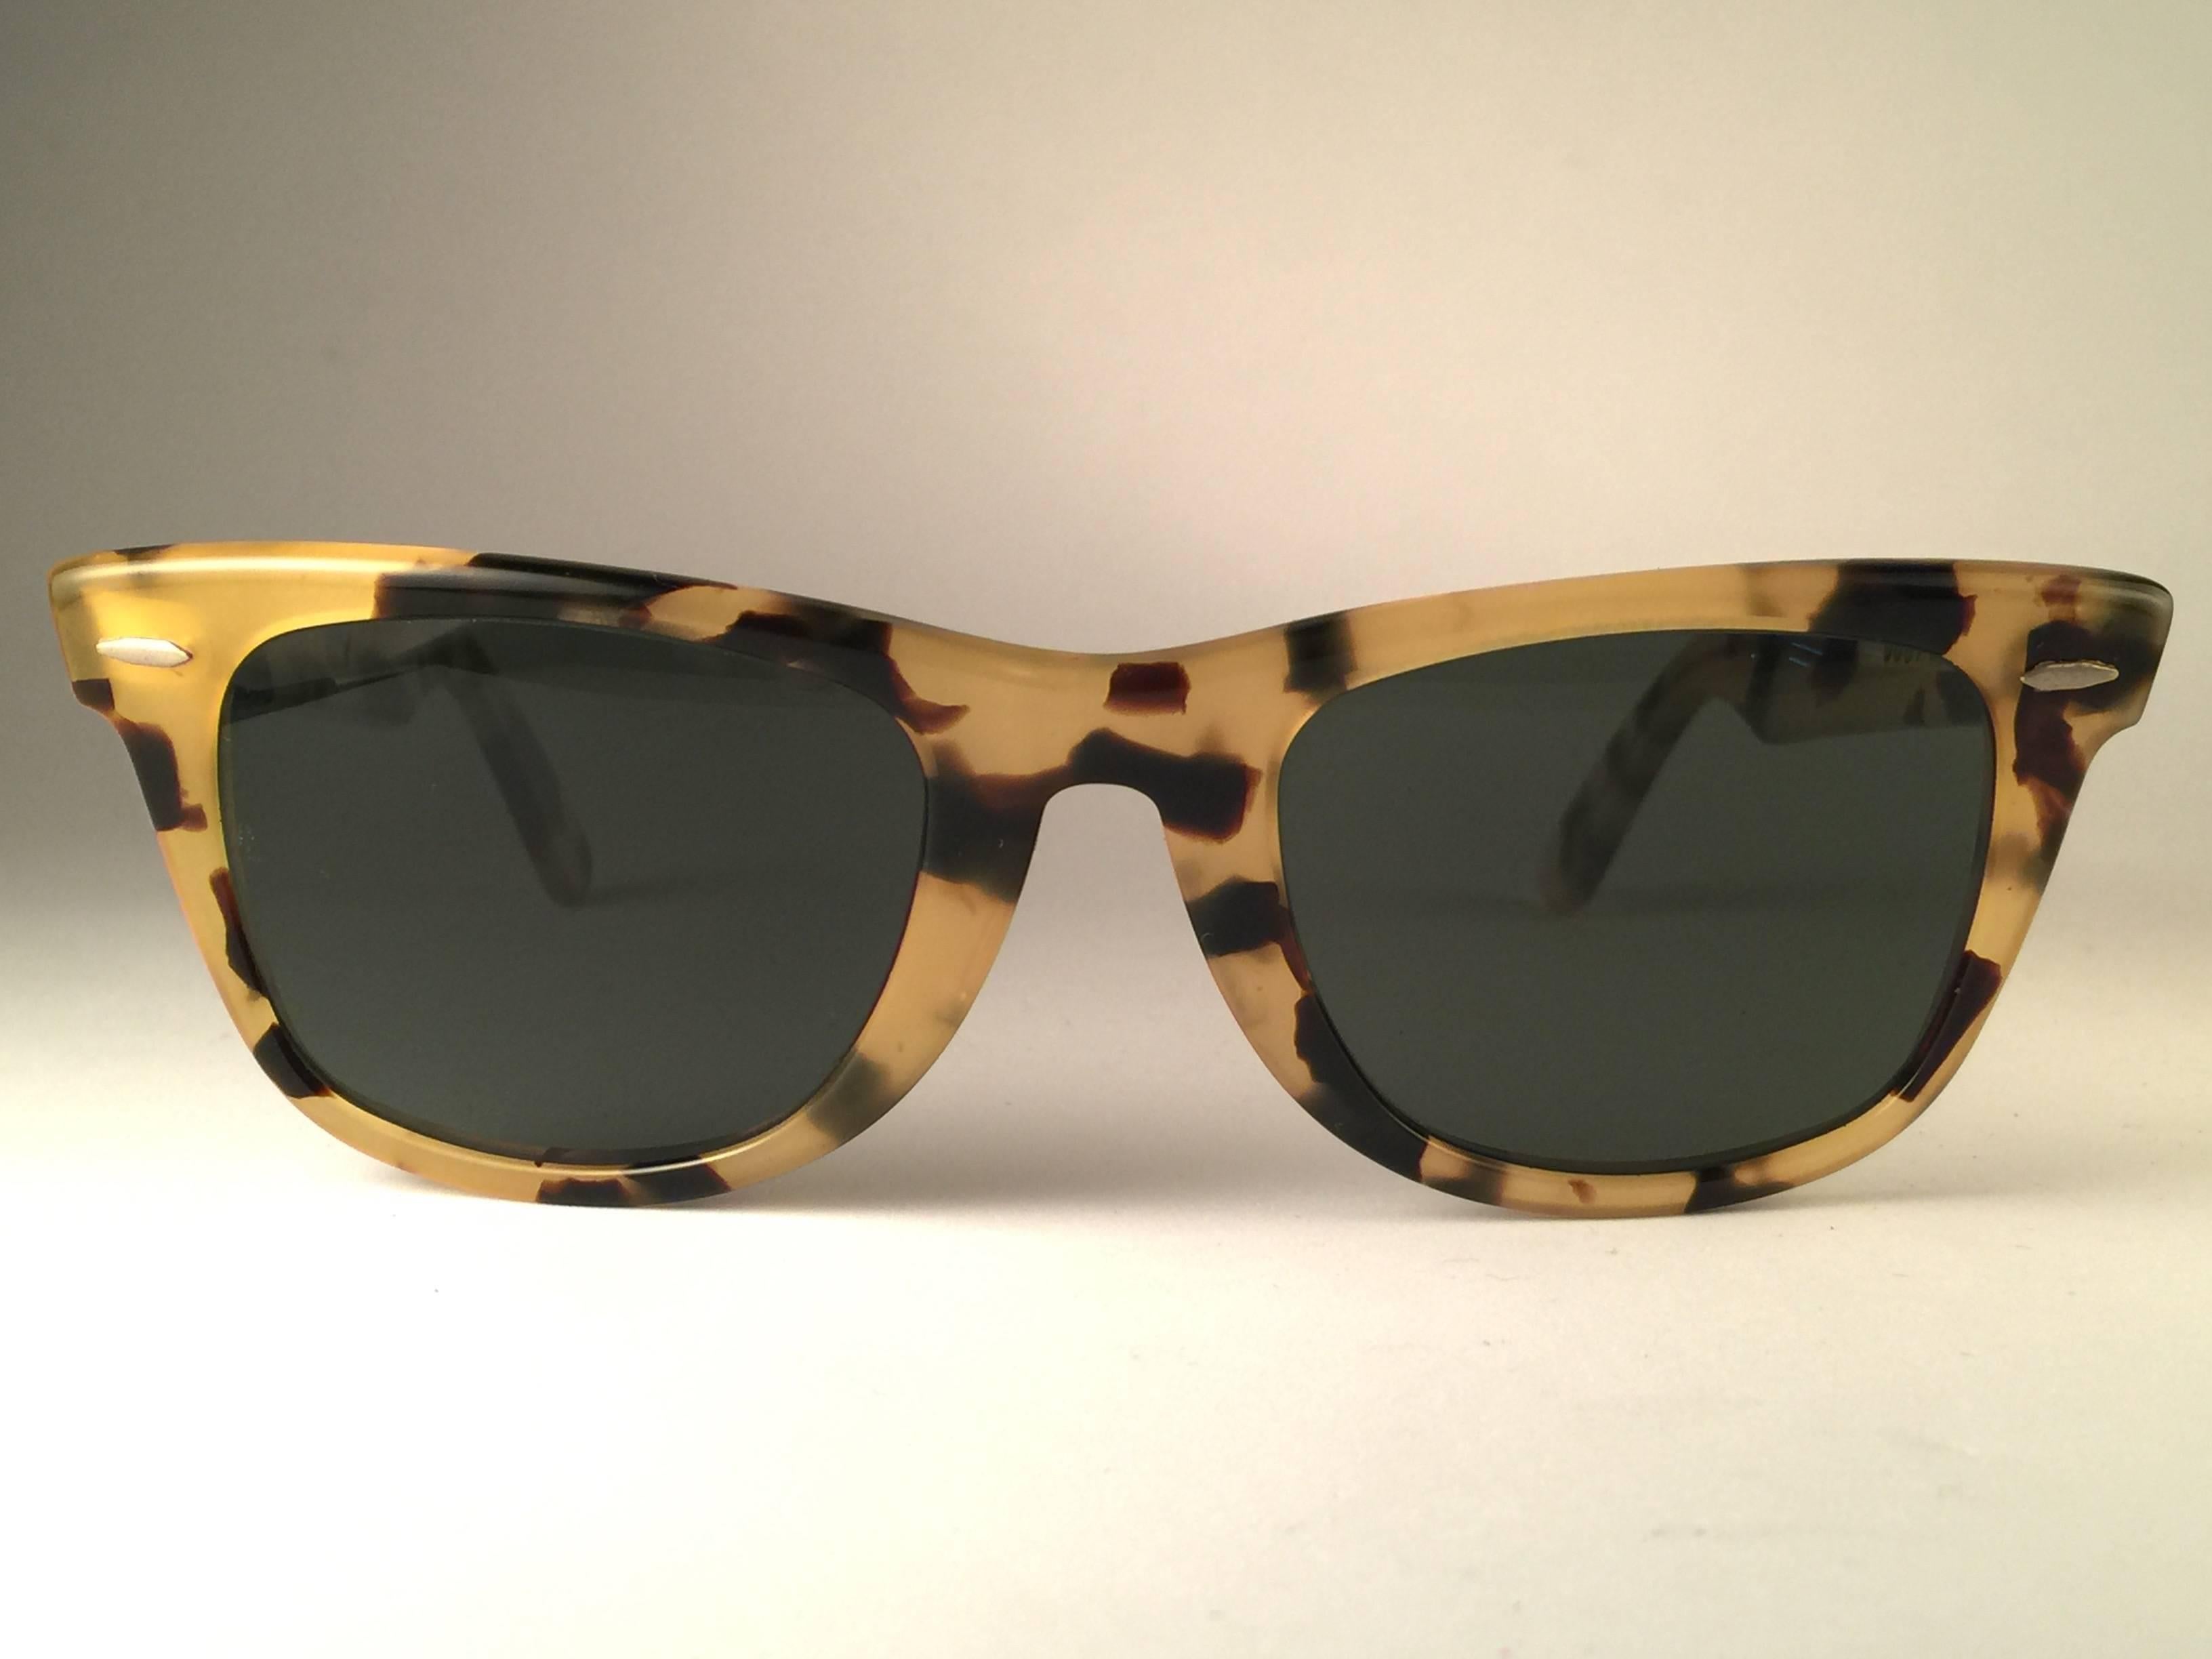 New classic Wayfarer in light tortoise. 
B&L etched in both G15 grey lenses. Please notice that this item is nearly 40 years old and could show some storage wear.  
New, ever worn or displayed.
Made in USA.